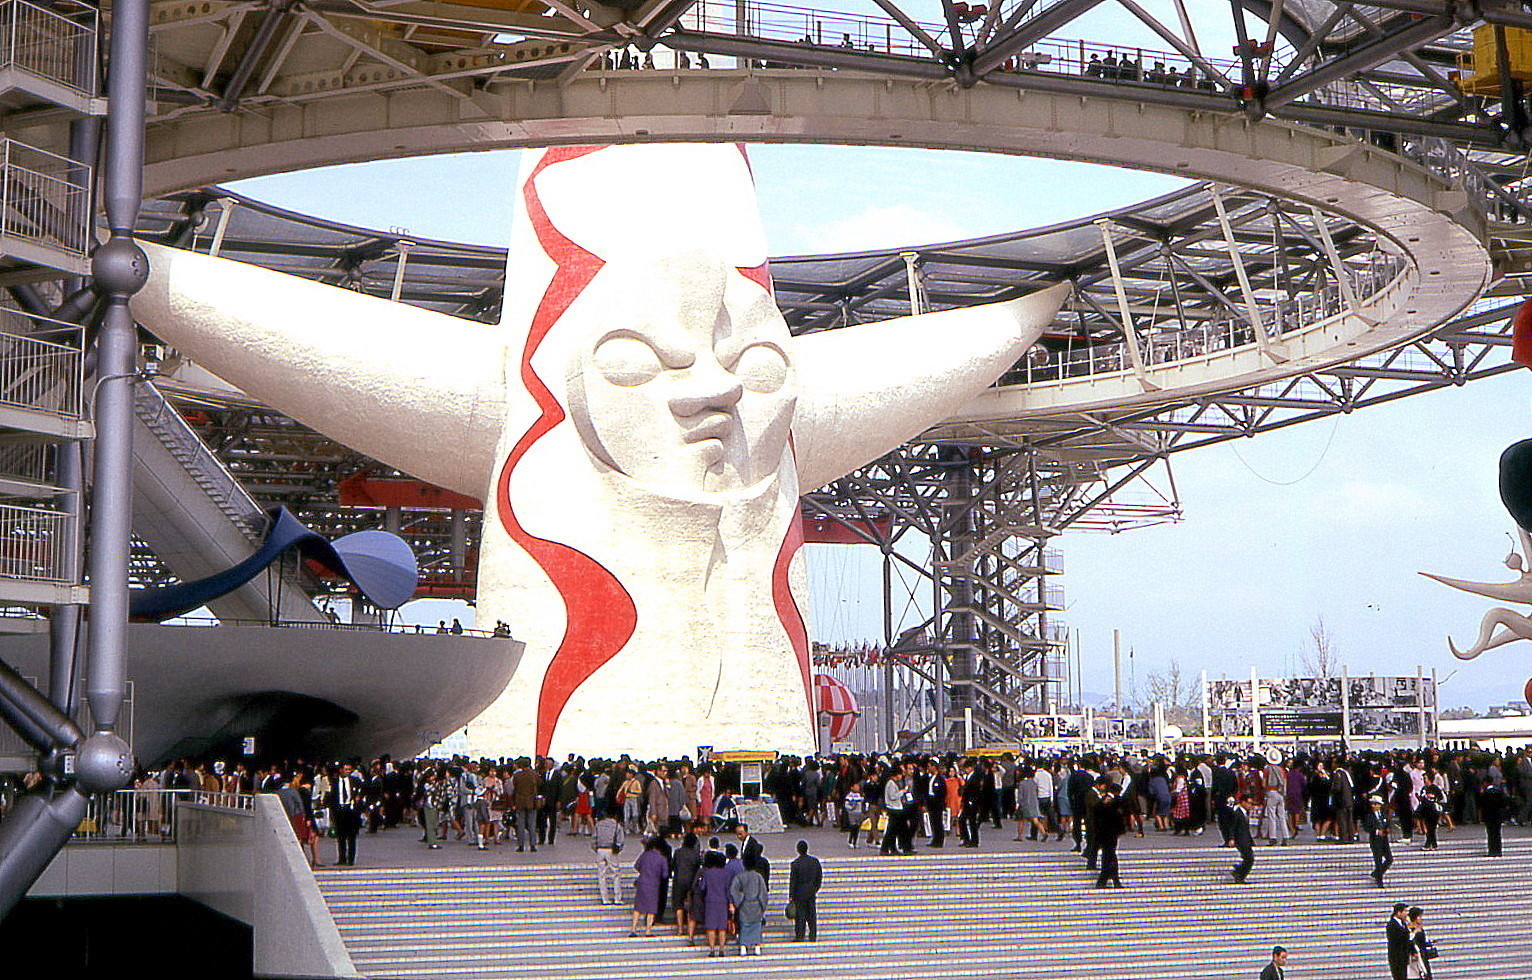 The Tower of the Sun, created by Japanese artist Tarō Okamoto, shown here in 1970.